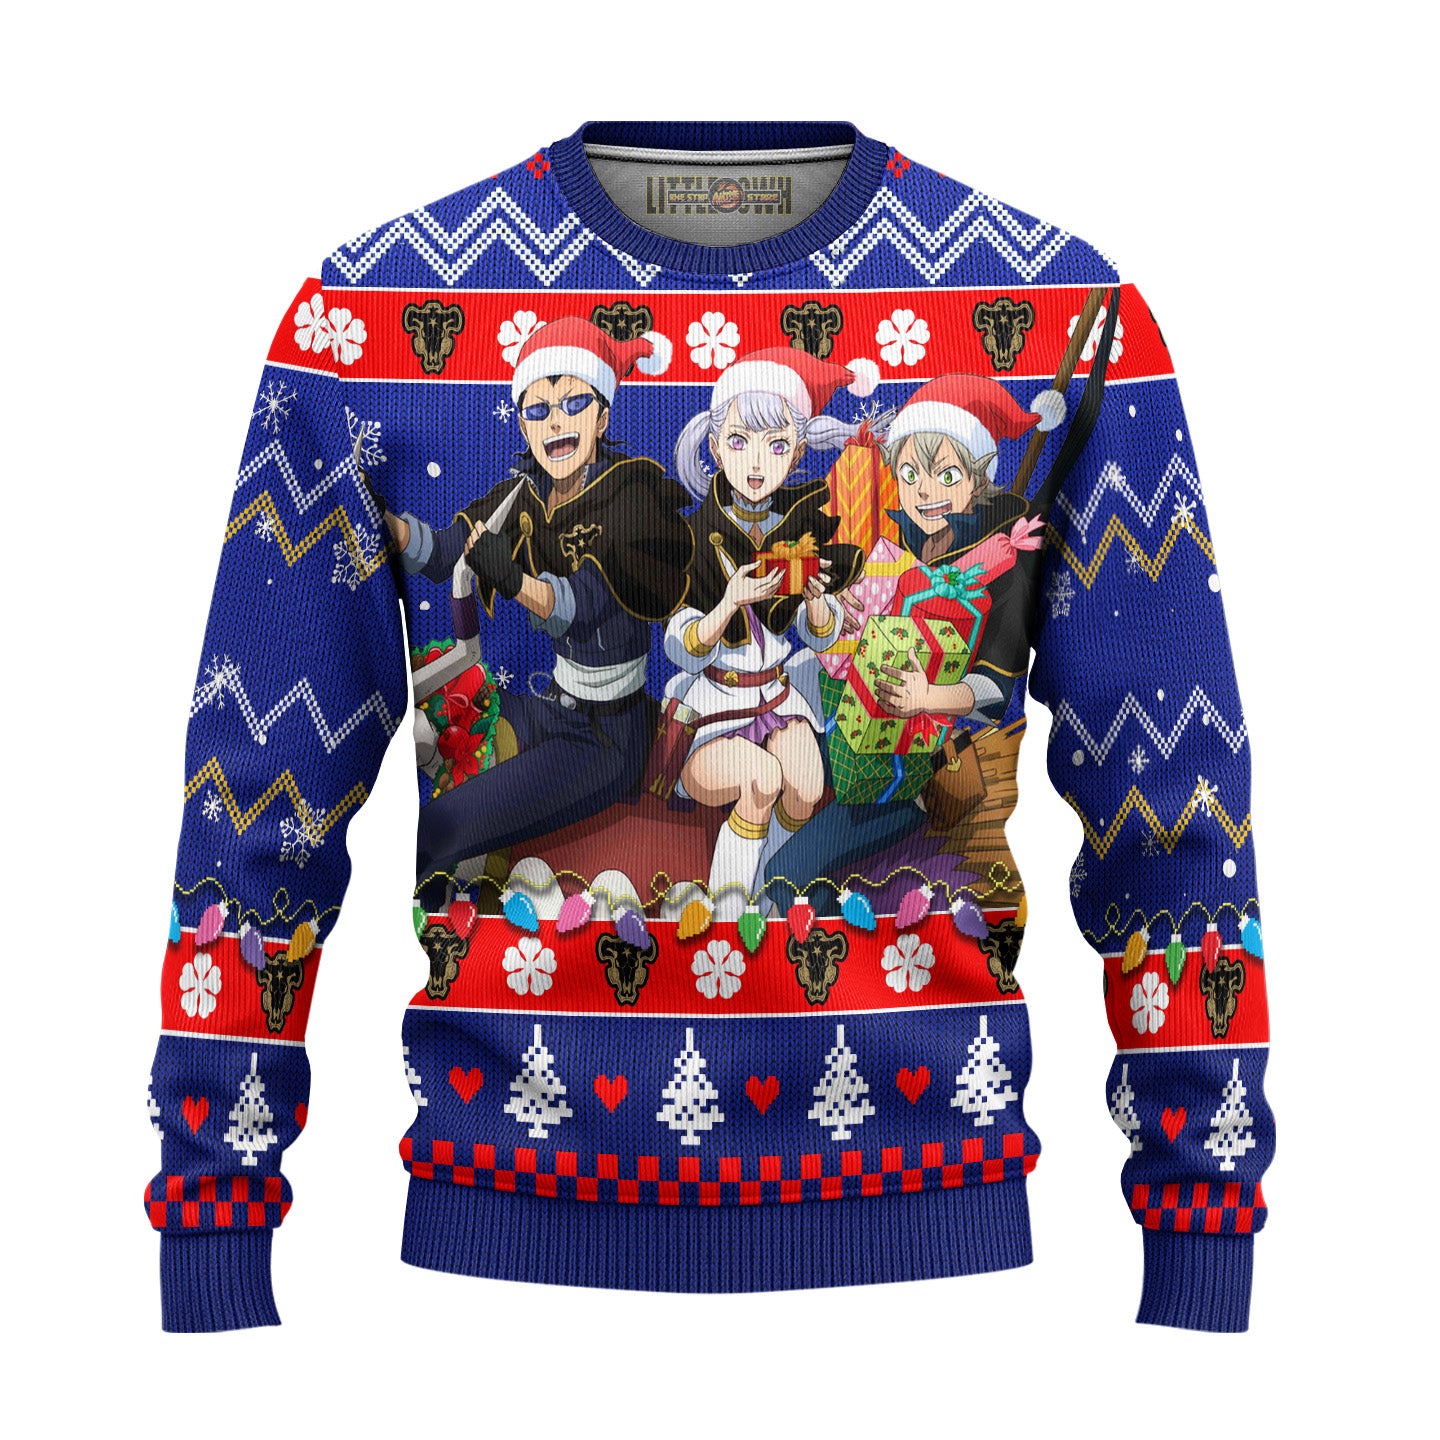 Black Clover Anime Ugly Christmas Sweater Characters New Design